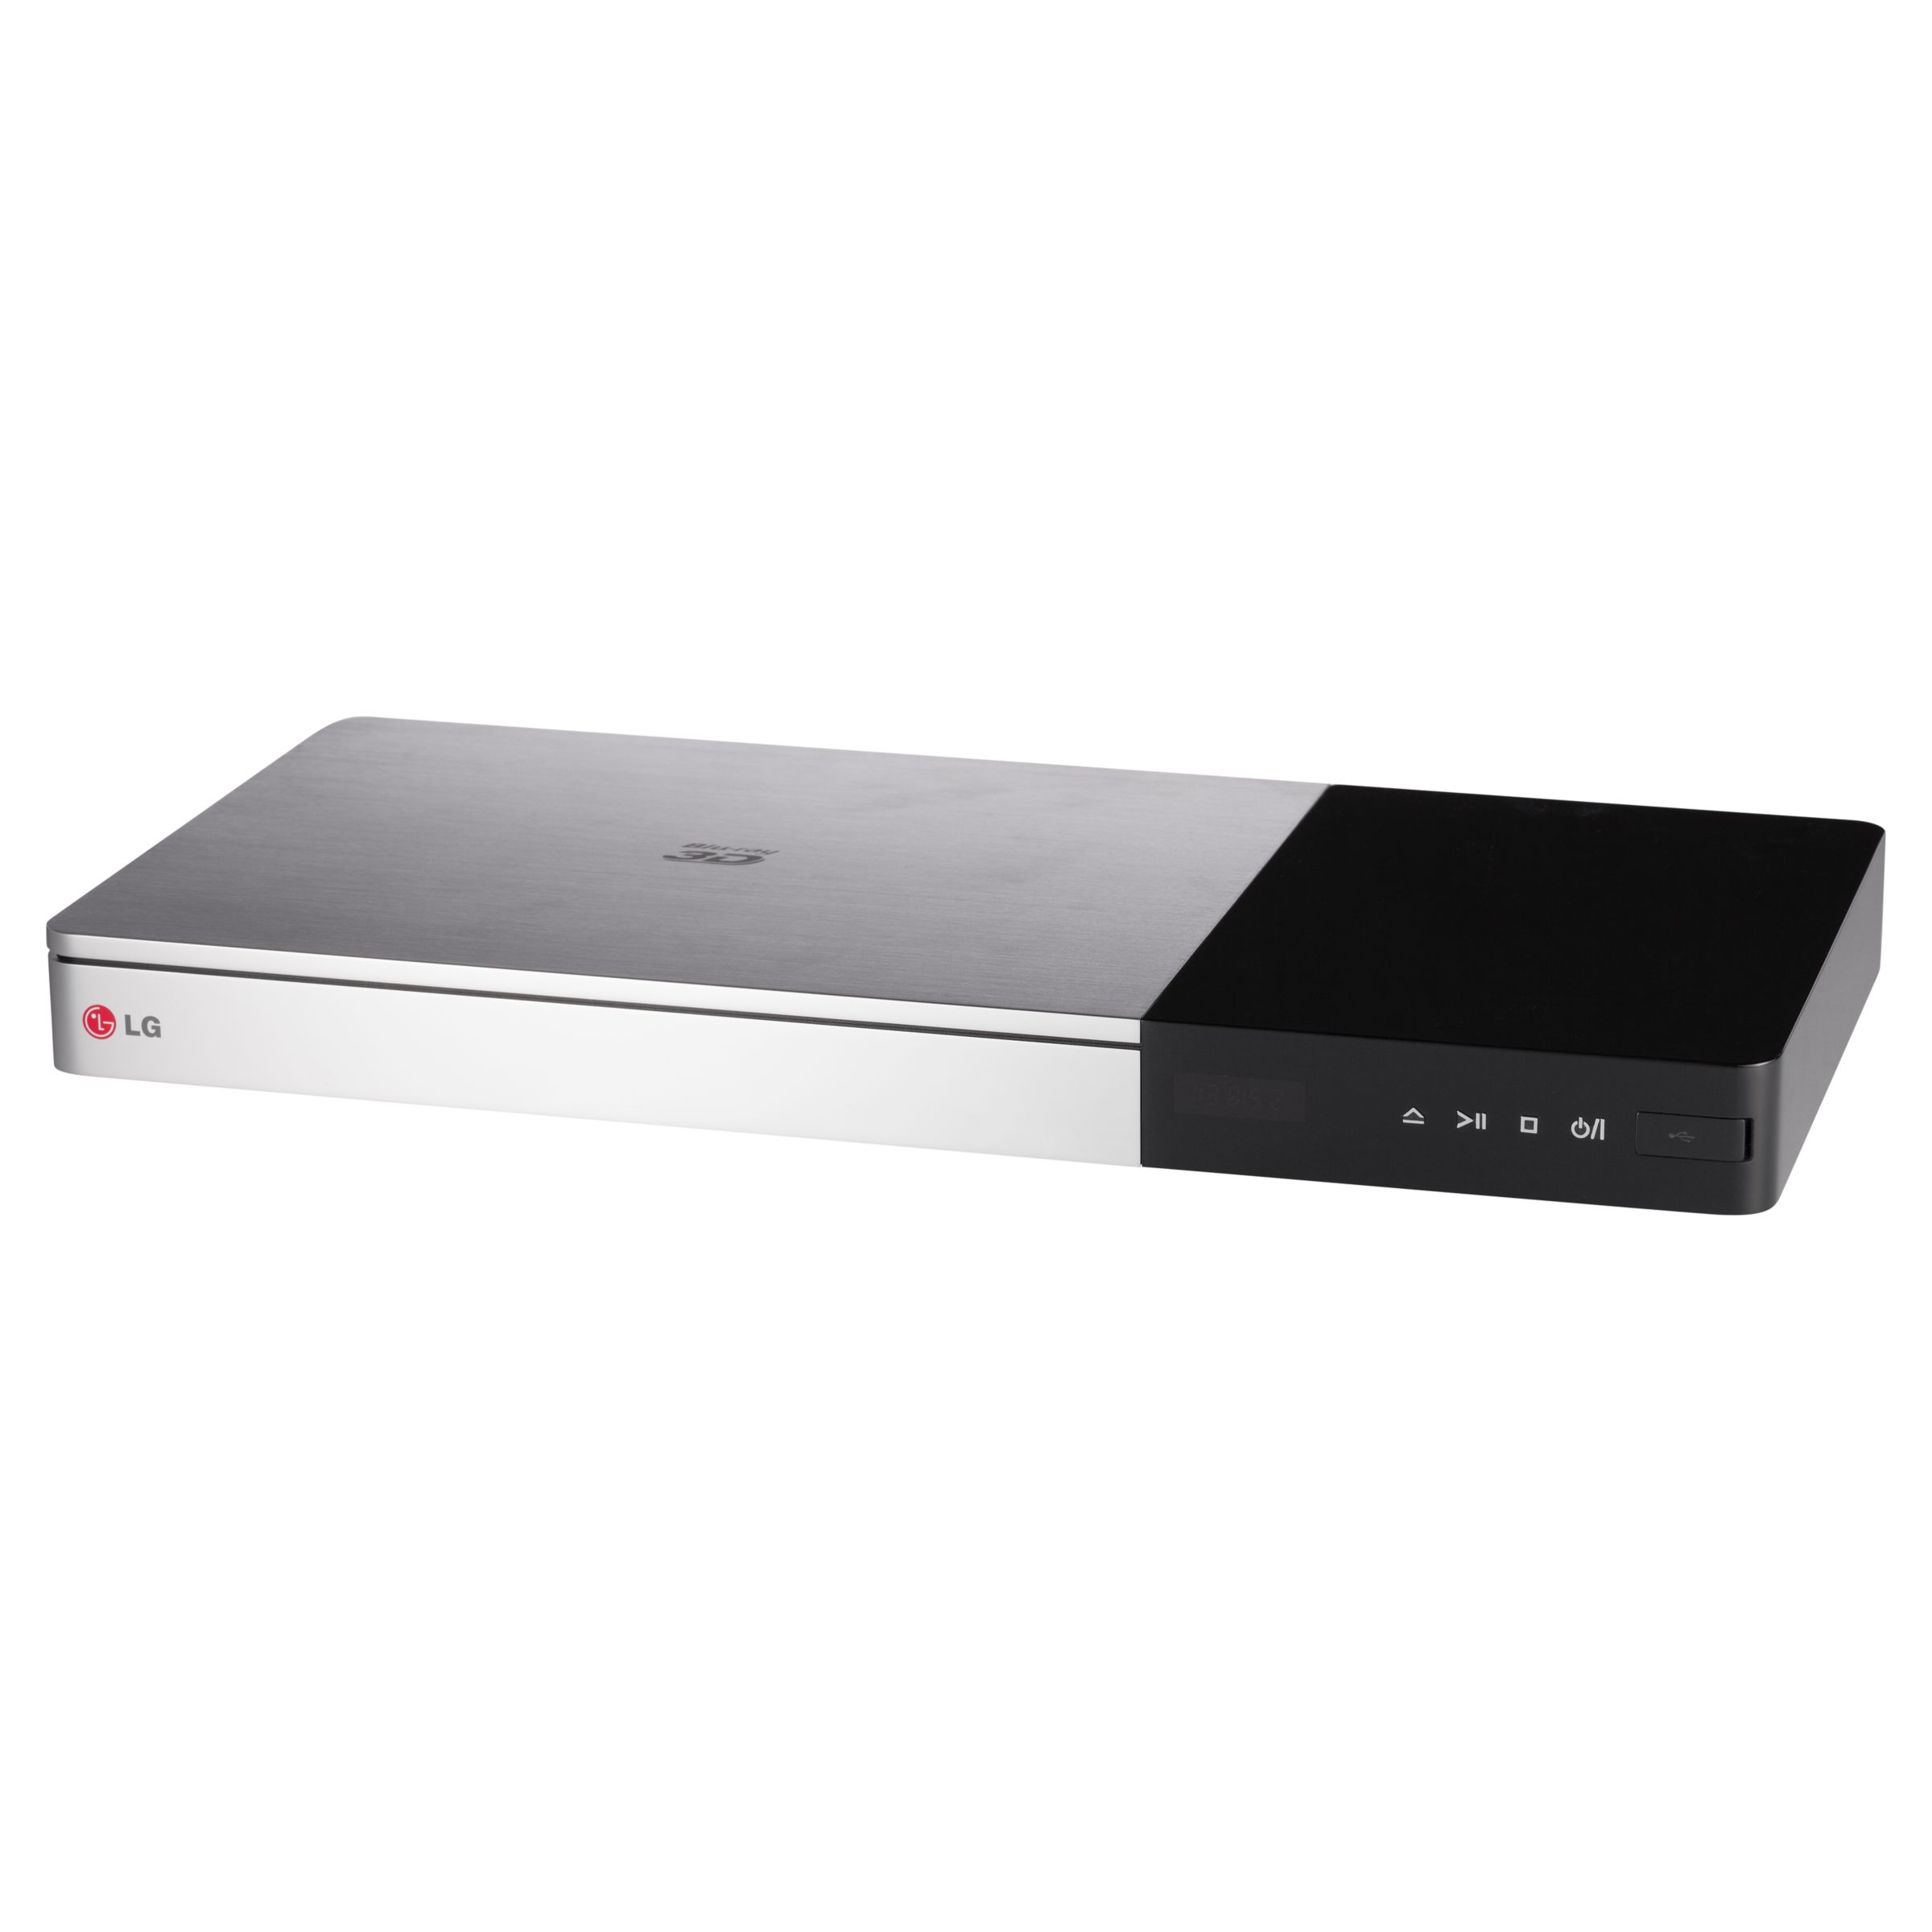 Lg Bp740 Smart 3d 4k Ultra Hd Blu Ray Dvd Player With Nfc And Magic Remote At John Lewis Partners